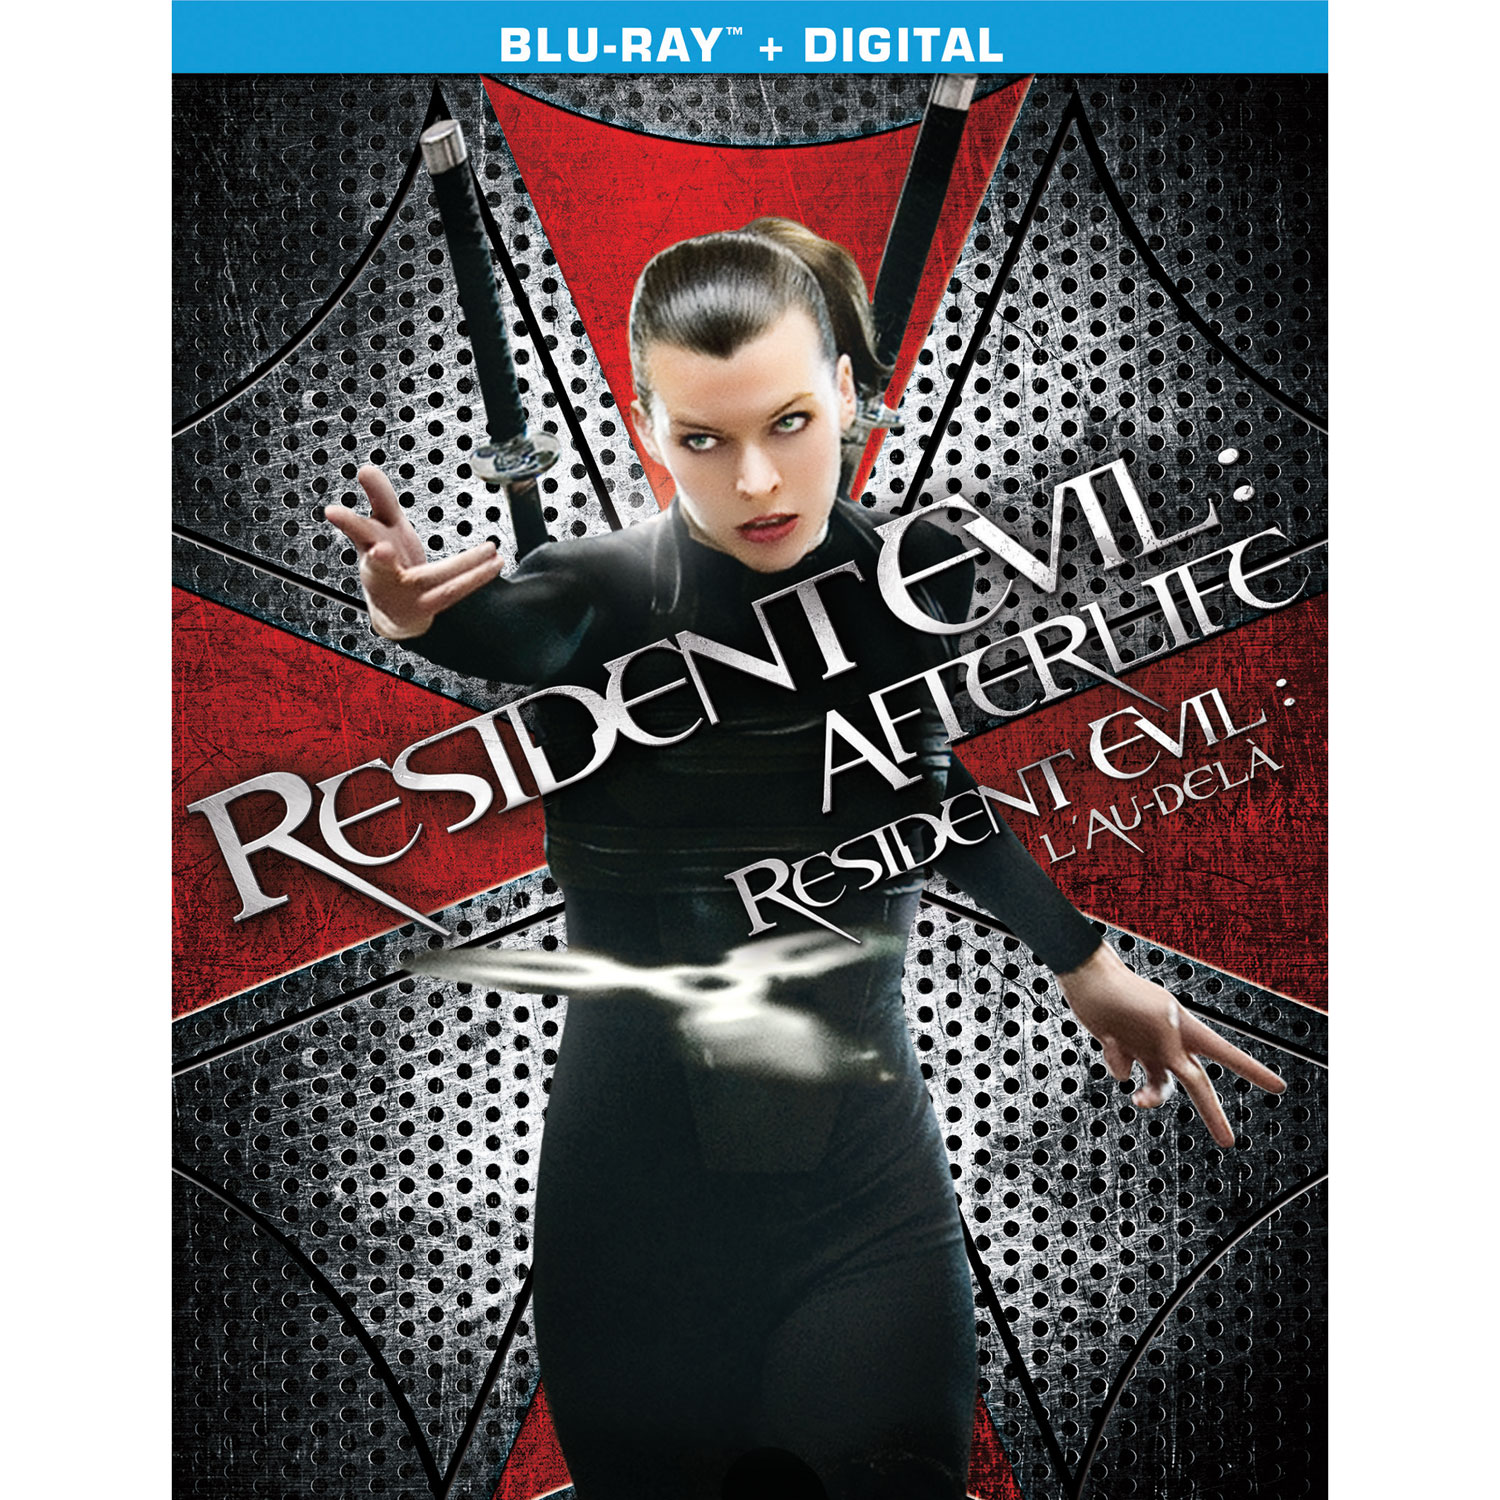 Resident Evil: Afterlife (Blu-ray)